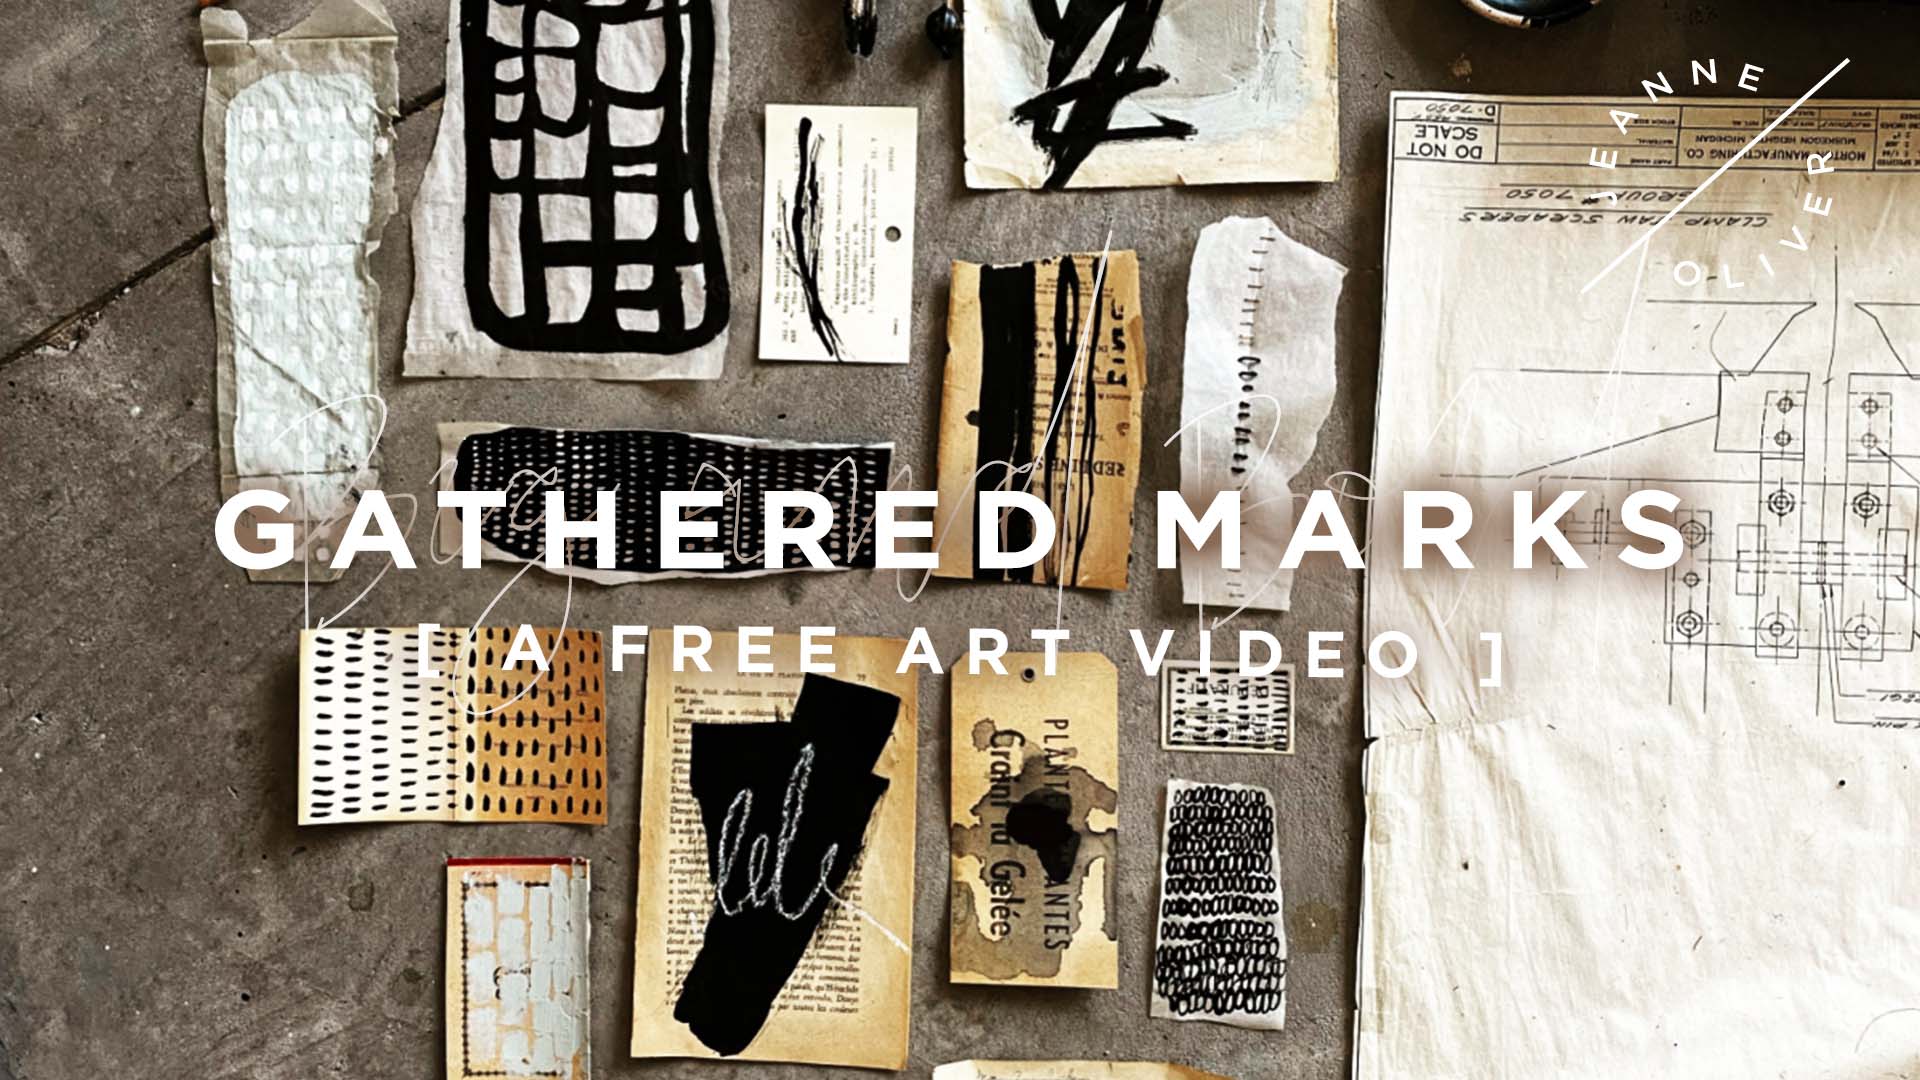 Free Art Video | Gathered Marks with Jeanne Oliver